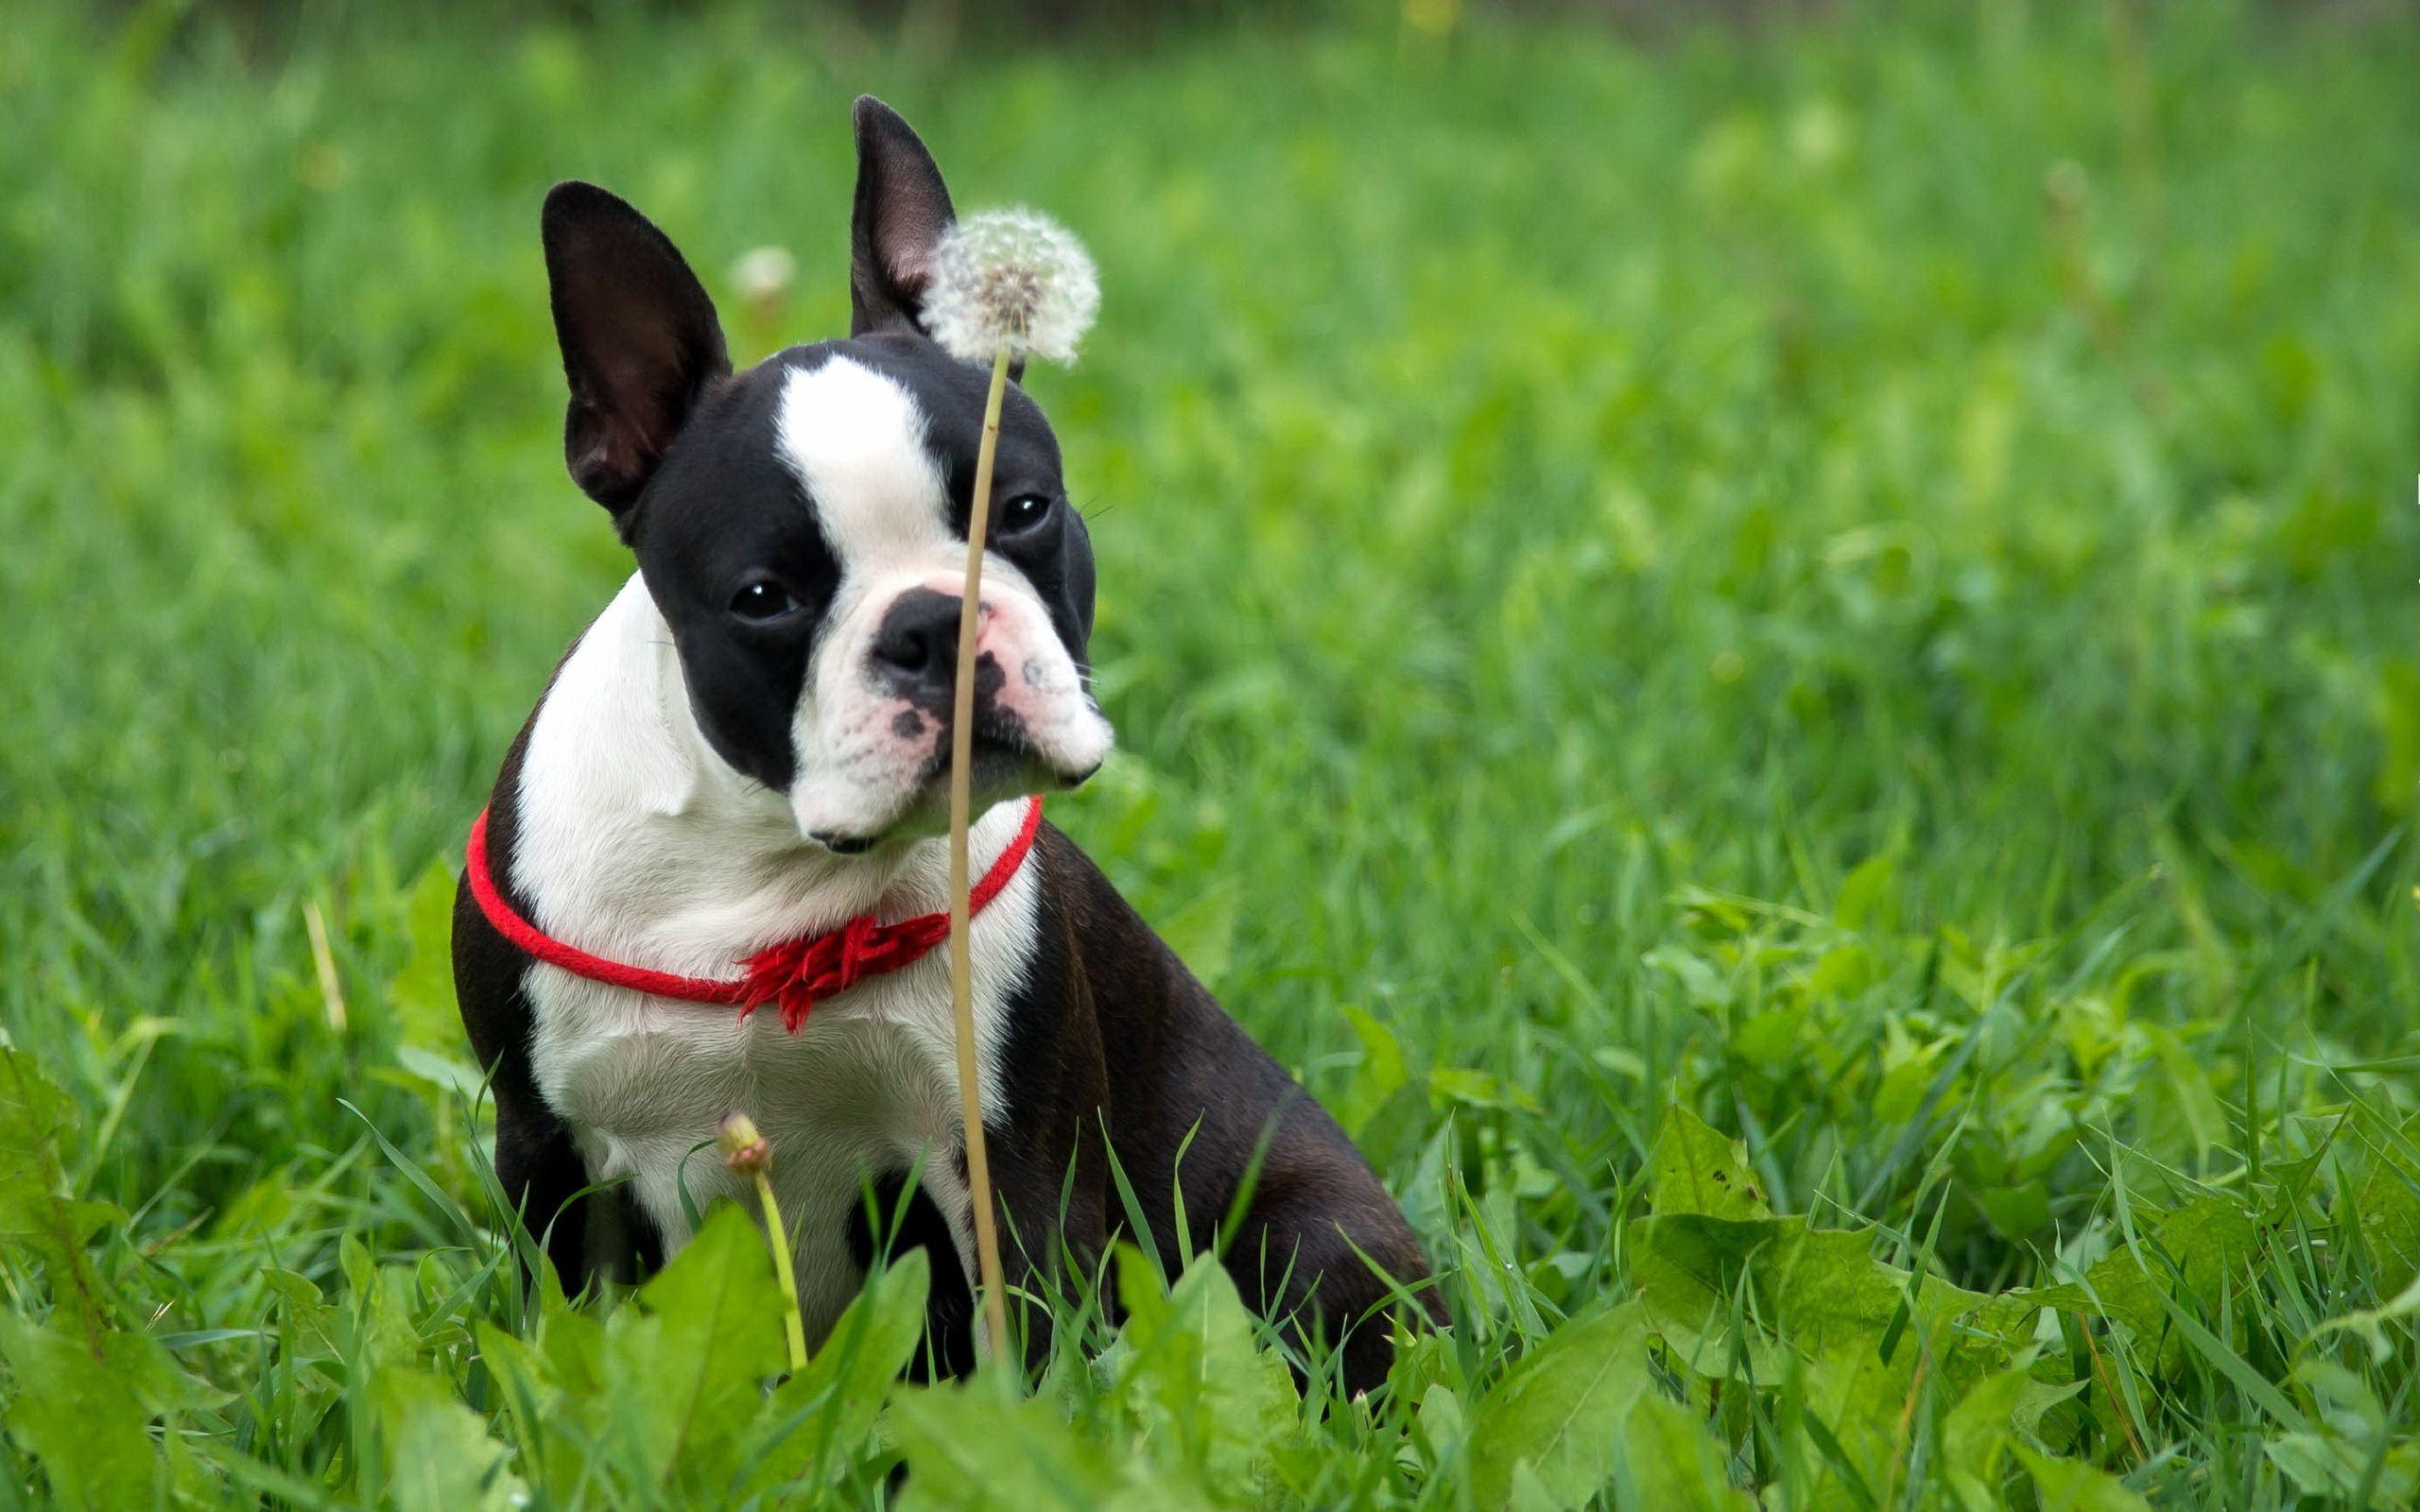 Download wallpapers Boston Terrier autumn bokeh dogs dog in forest  cute animals pets Boston Terrier Dog for desktop free Pictures for  desktop free  Boston terrier dog Boston terrier art Boston terrier